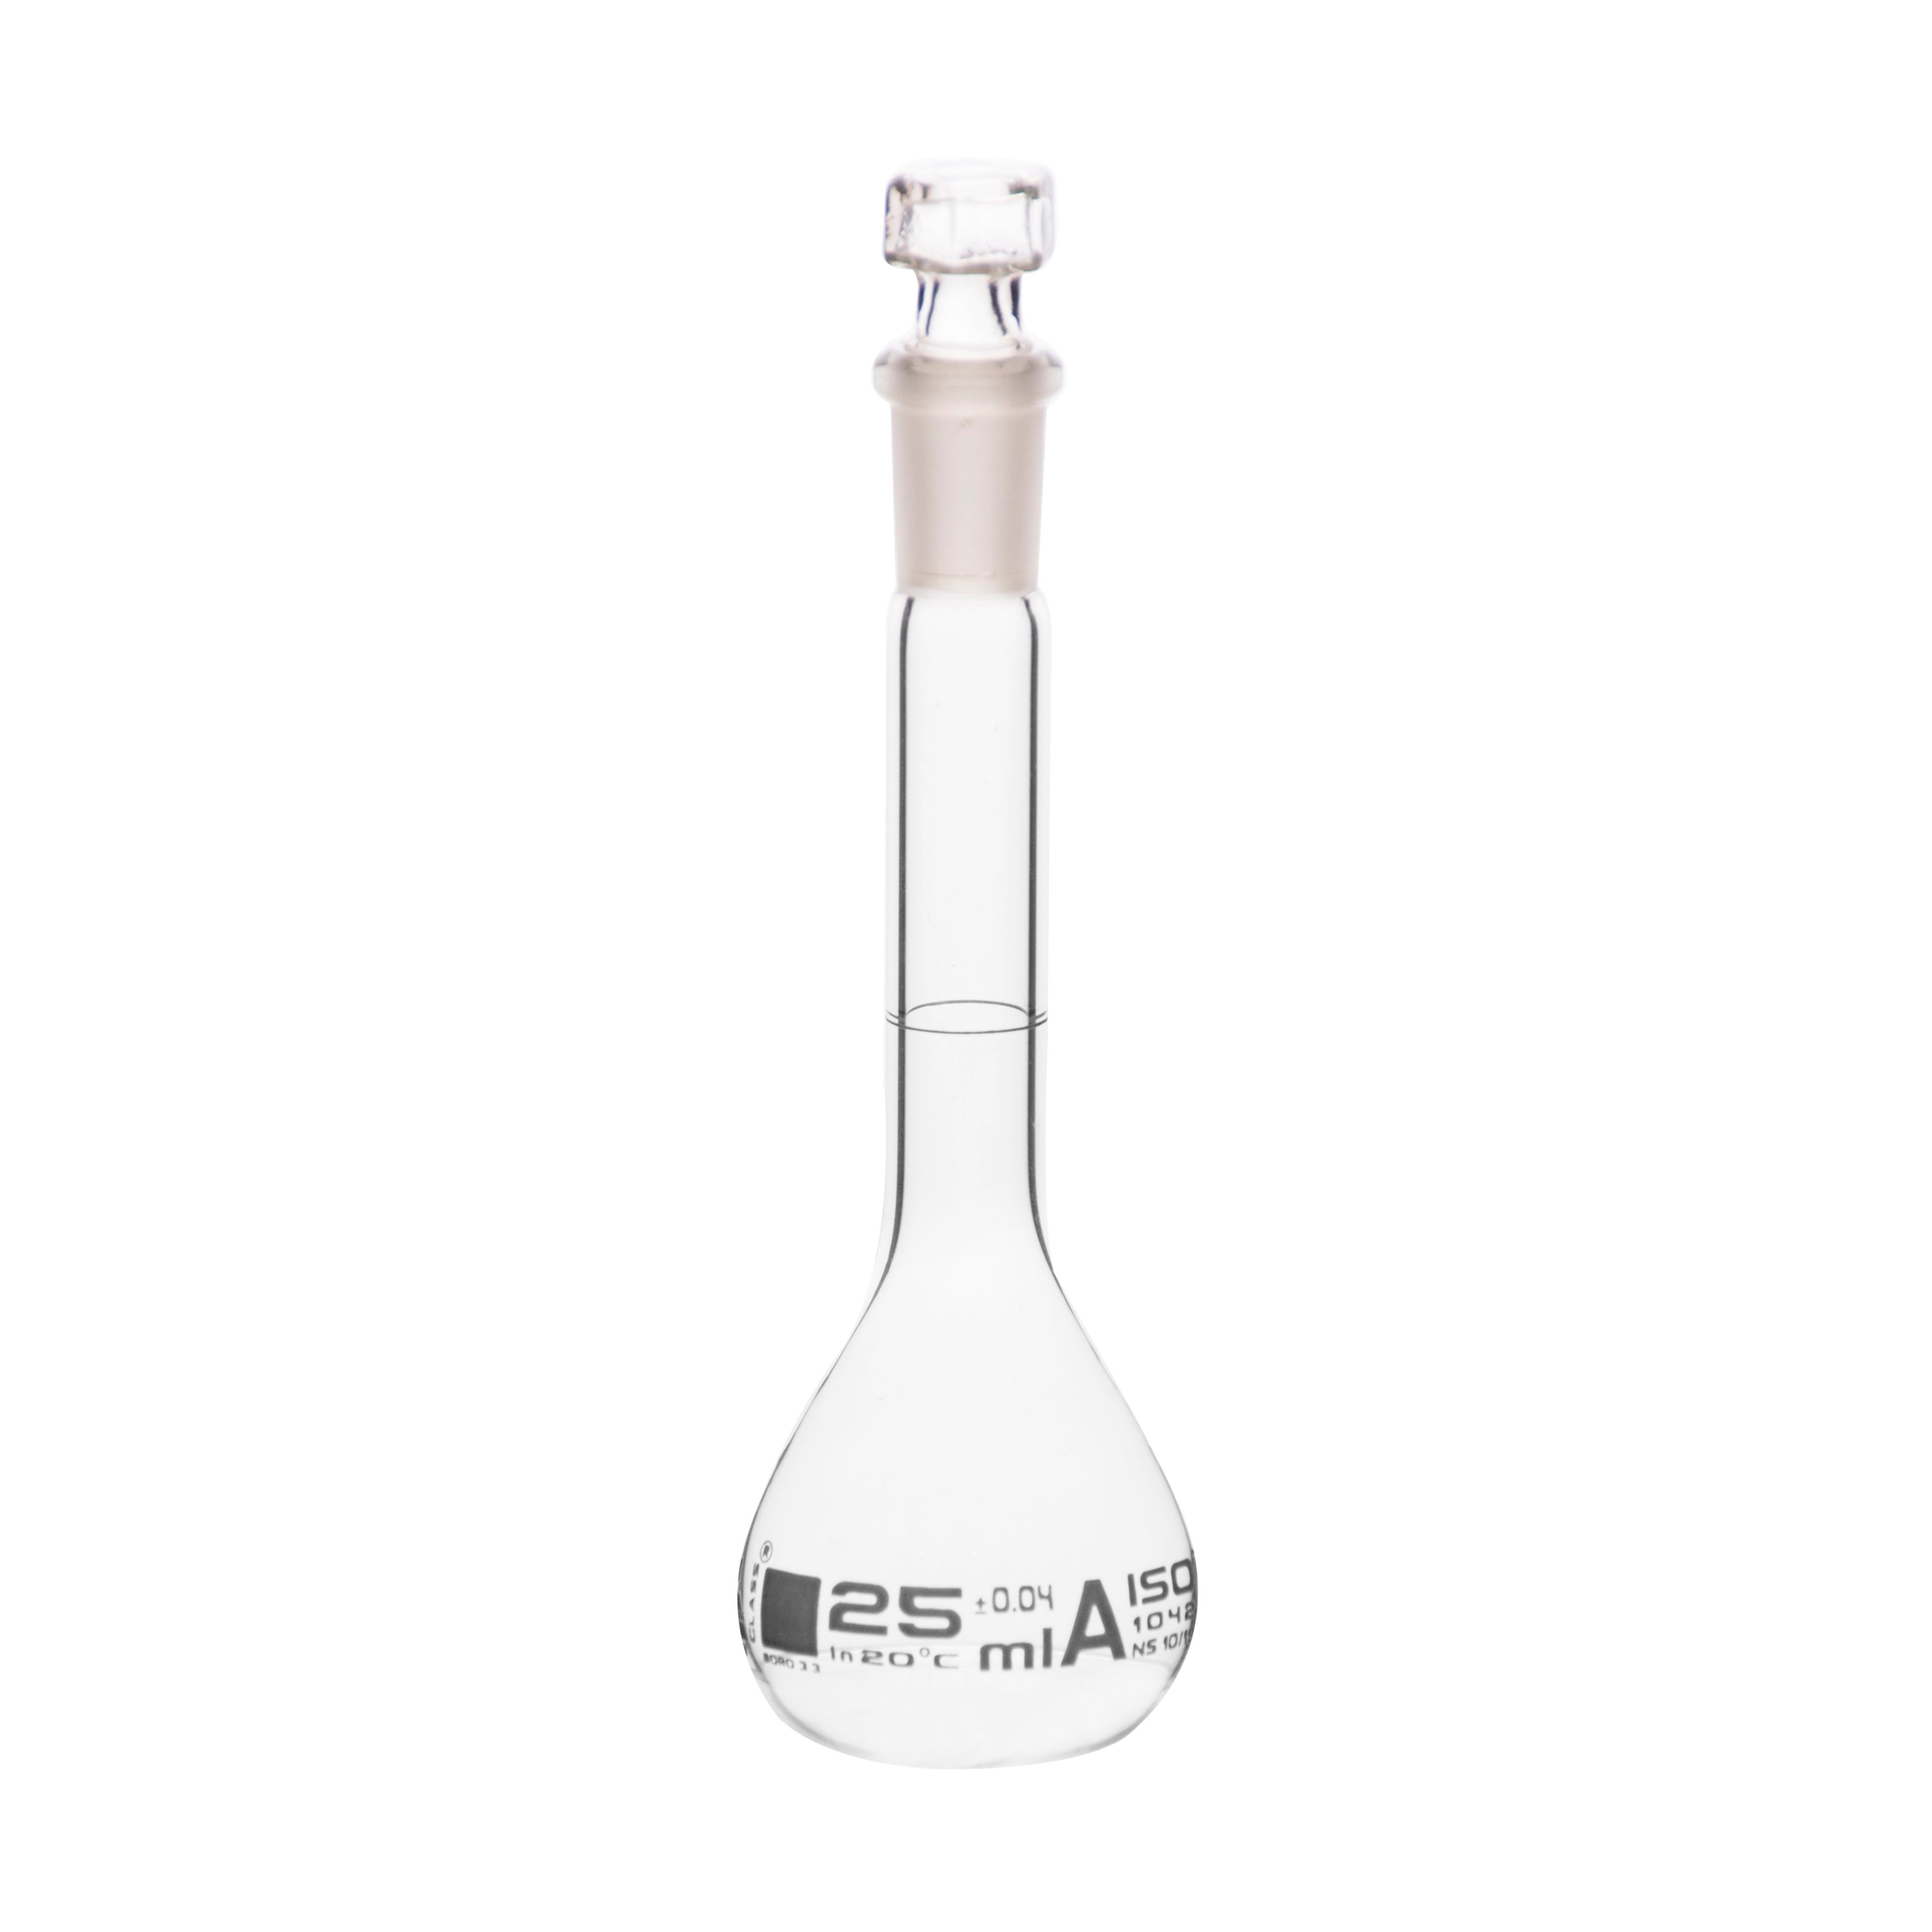 Borosilicate Volumetric Flask with Hollow Glass Stopper, 25ml, Class A, White Print, Autoclavable